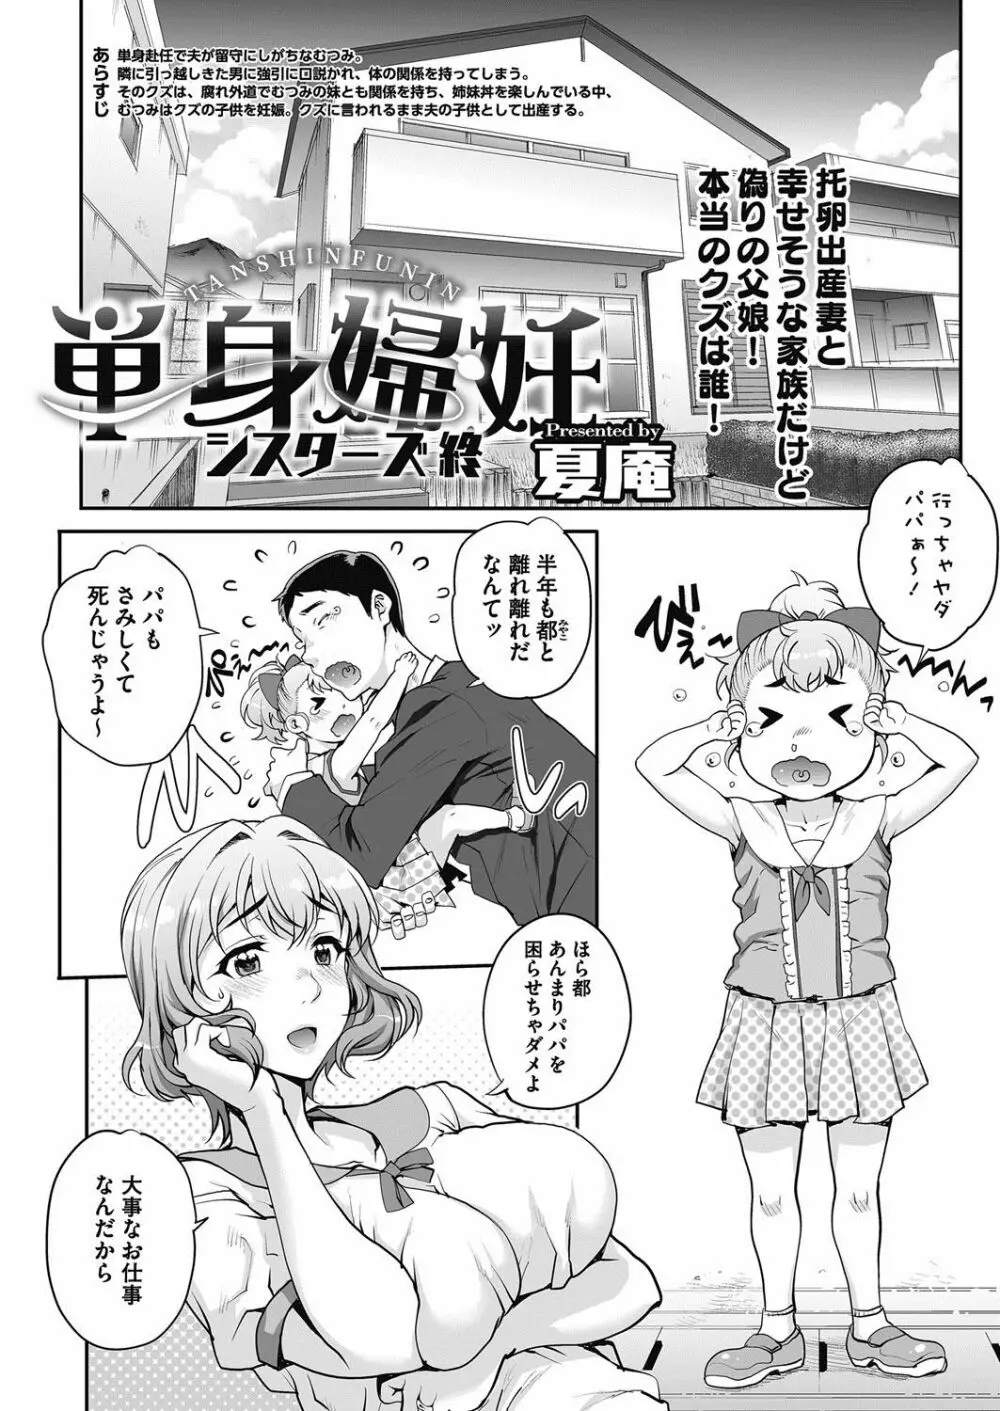 [Carn] Tanshinfunin ~Sisters~ Ch 1-7 117ページ